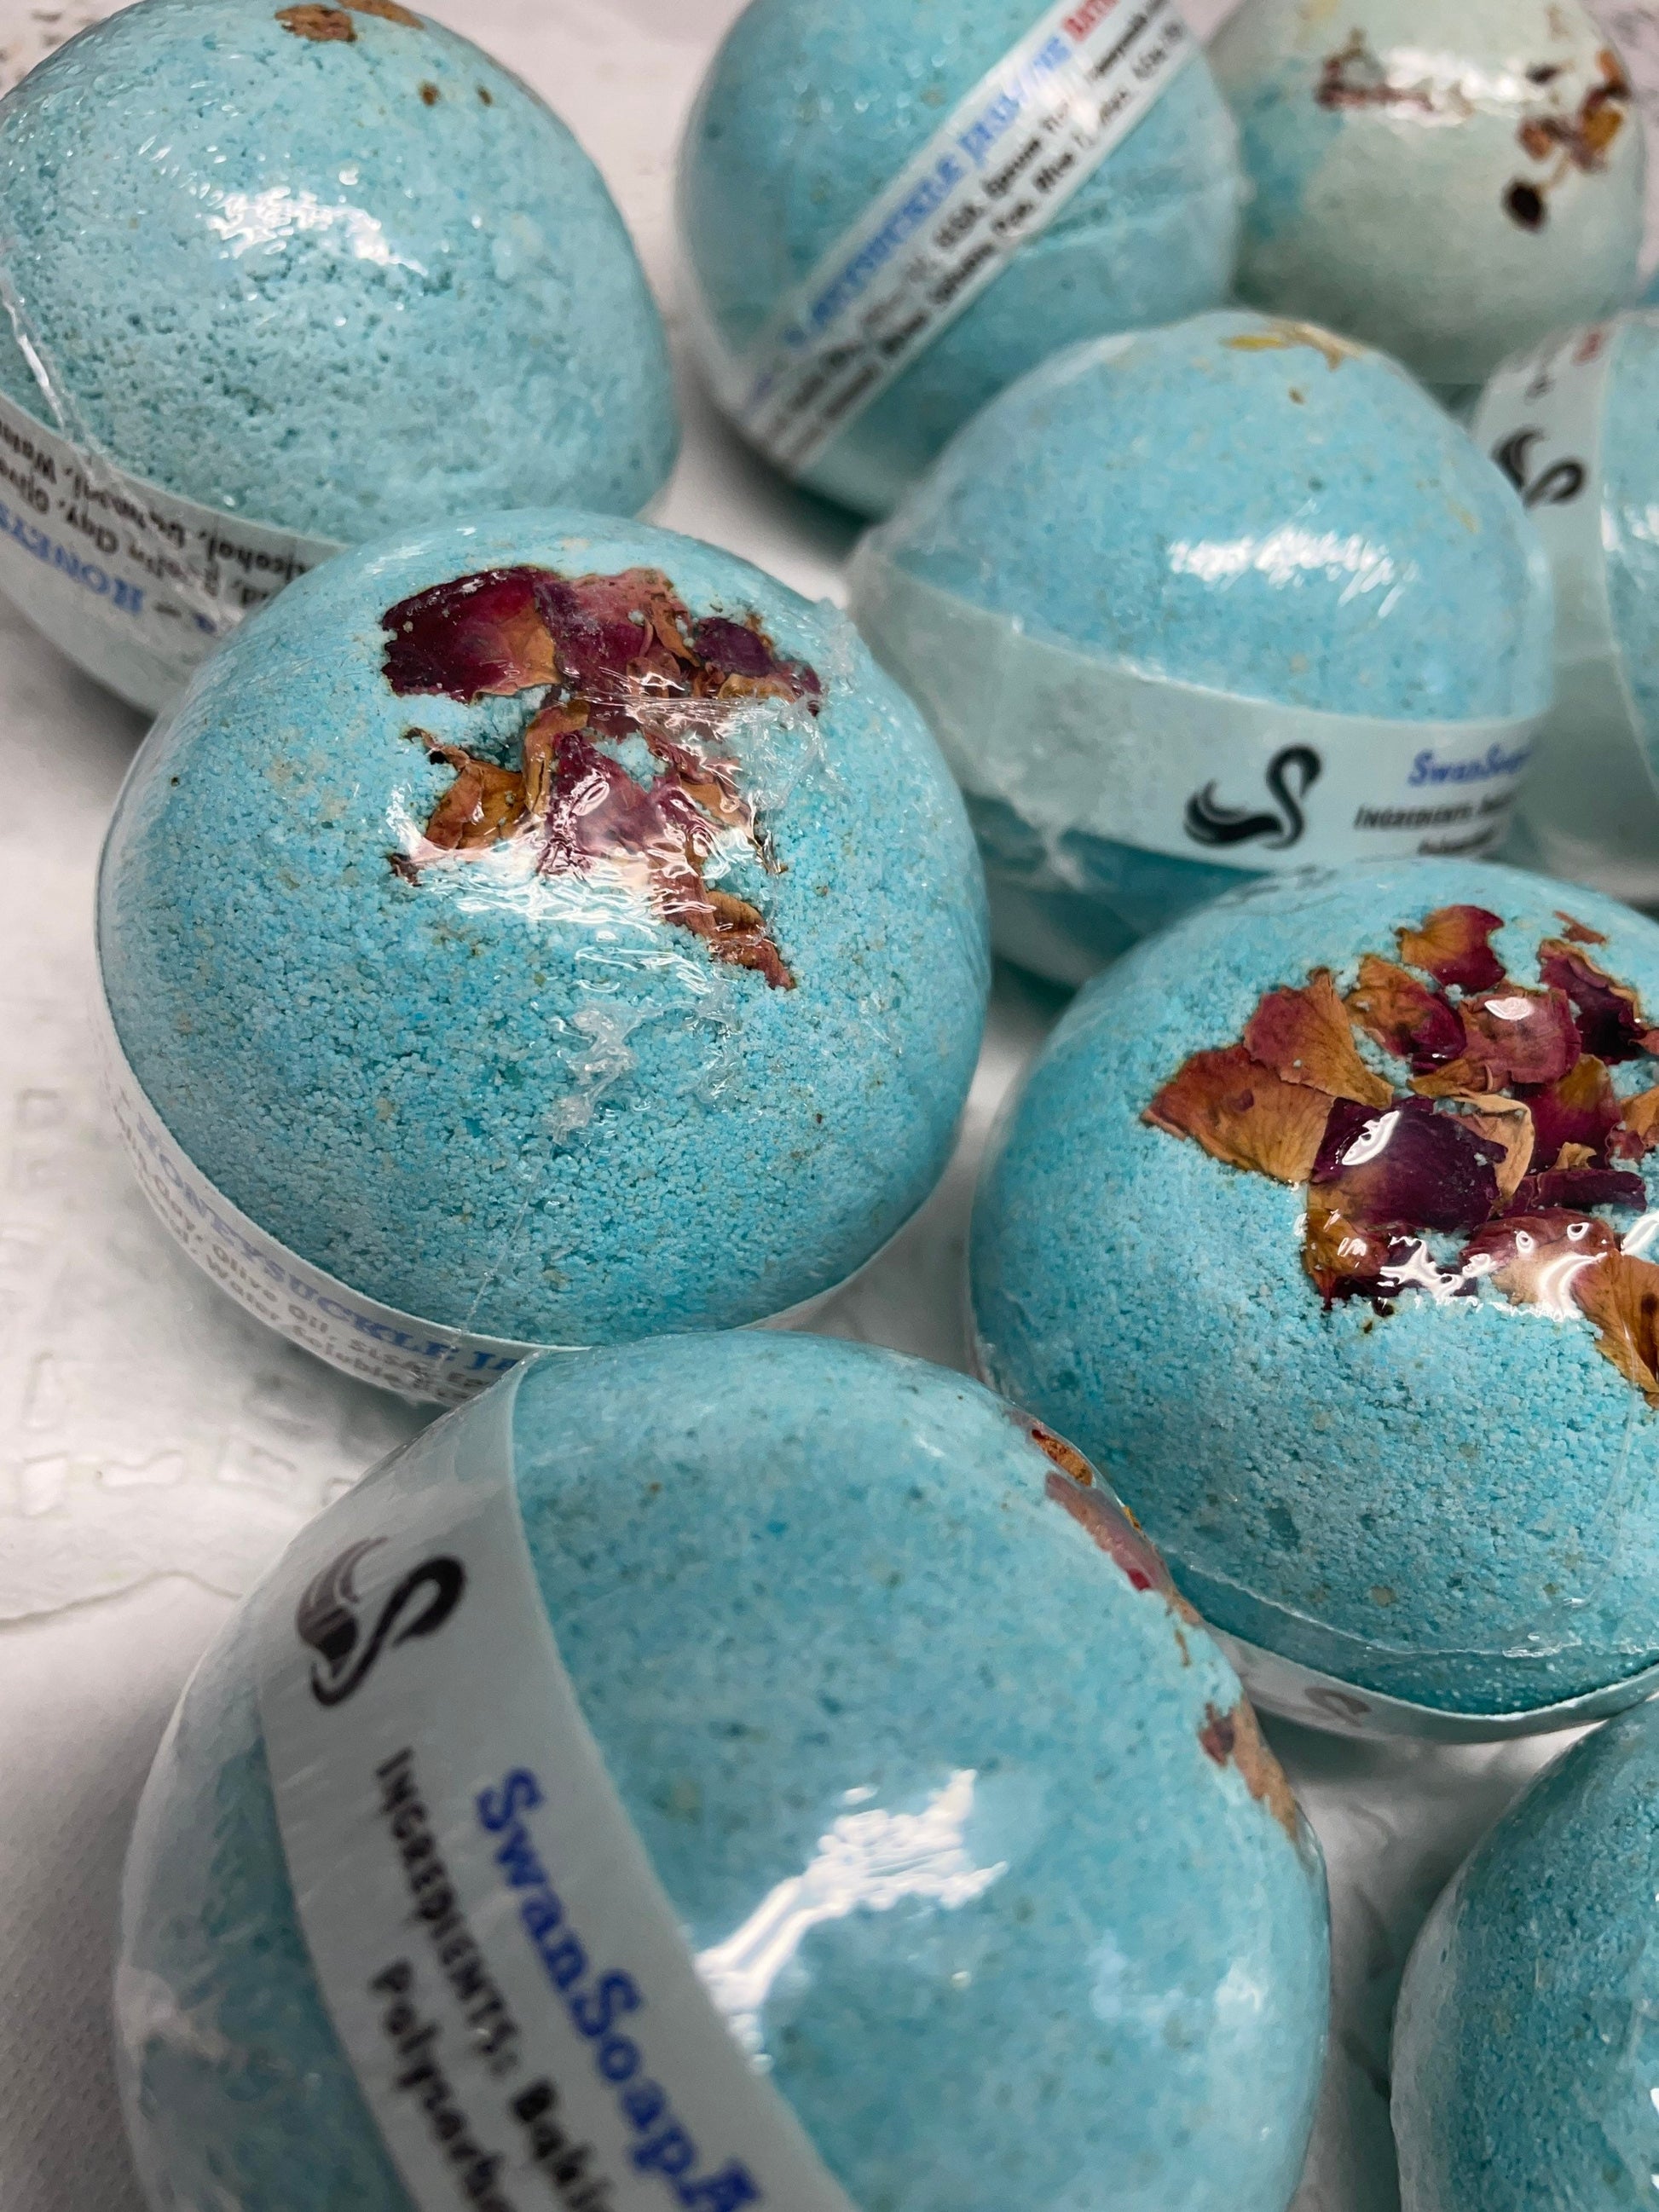 a photo of Honeysuckle Jasmine Bath Bombs, with real flower petals, Rose petals or Calendula Flower Petals in a light blue color